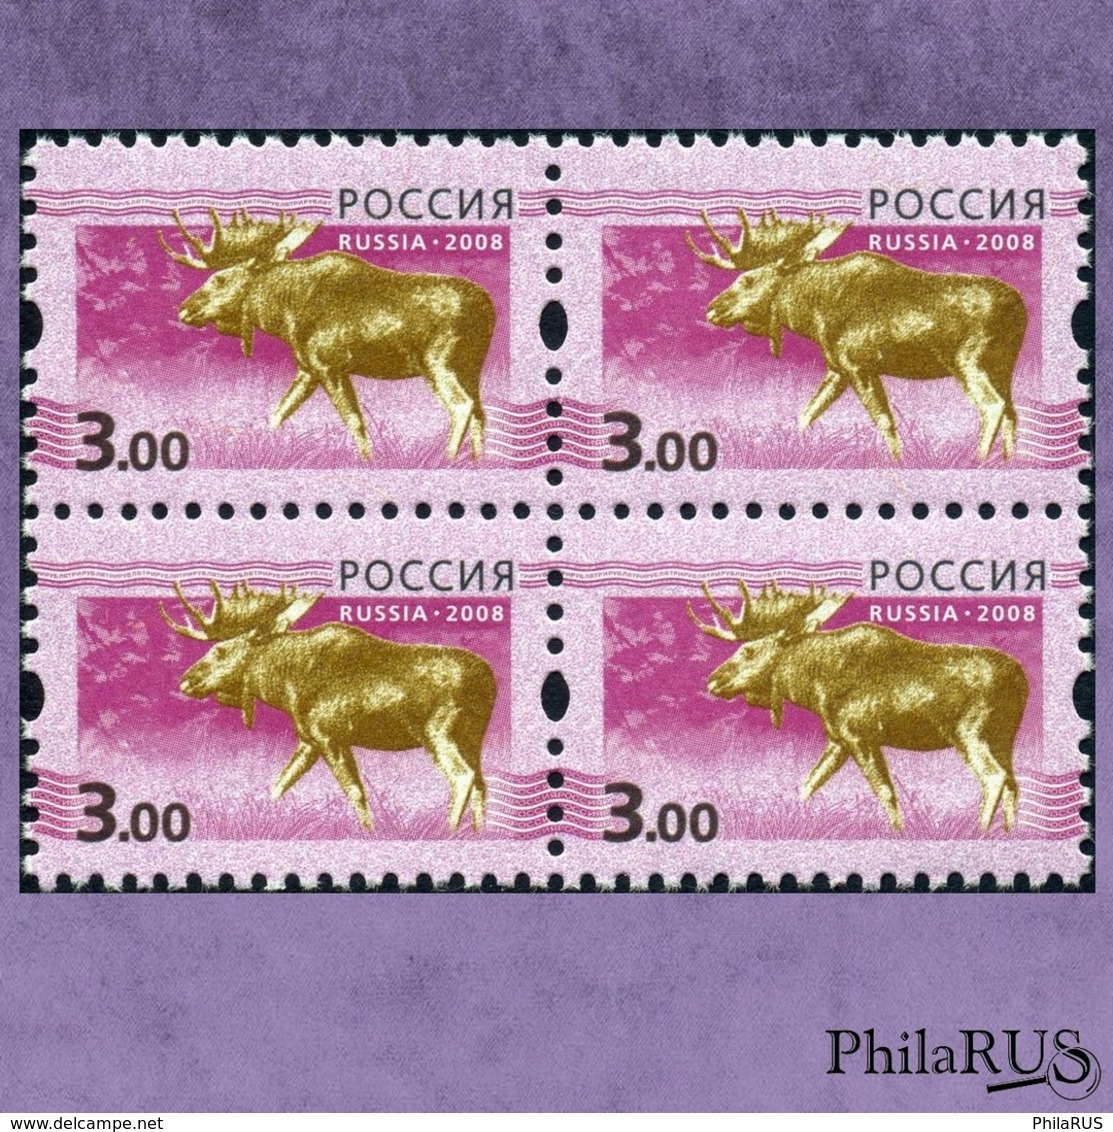 RARE! RUSSIA 2008(2010?) Mi.1491 5th Definitive Issue Fauna Elk 3-00 ERROR! -> Without Protect Line / Bl. Of 4 - Plaatfouten & Curiosa